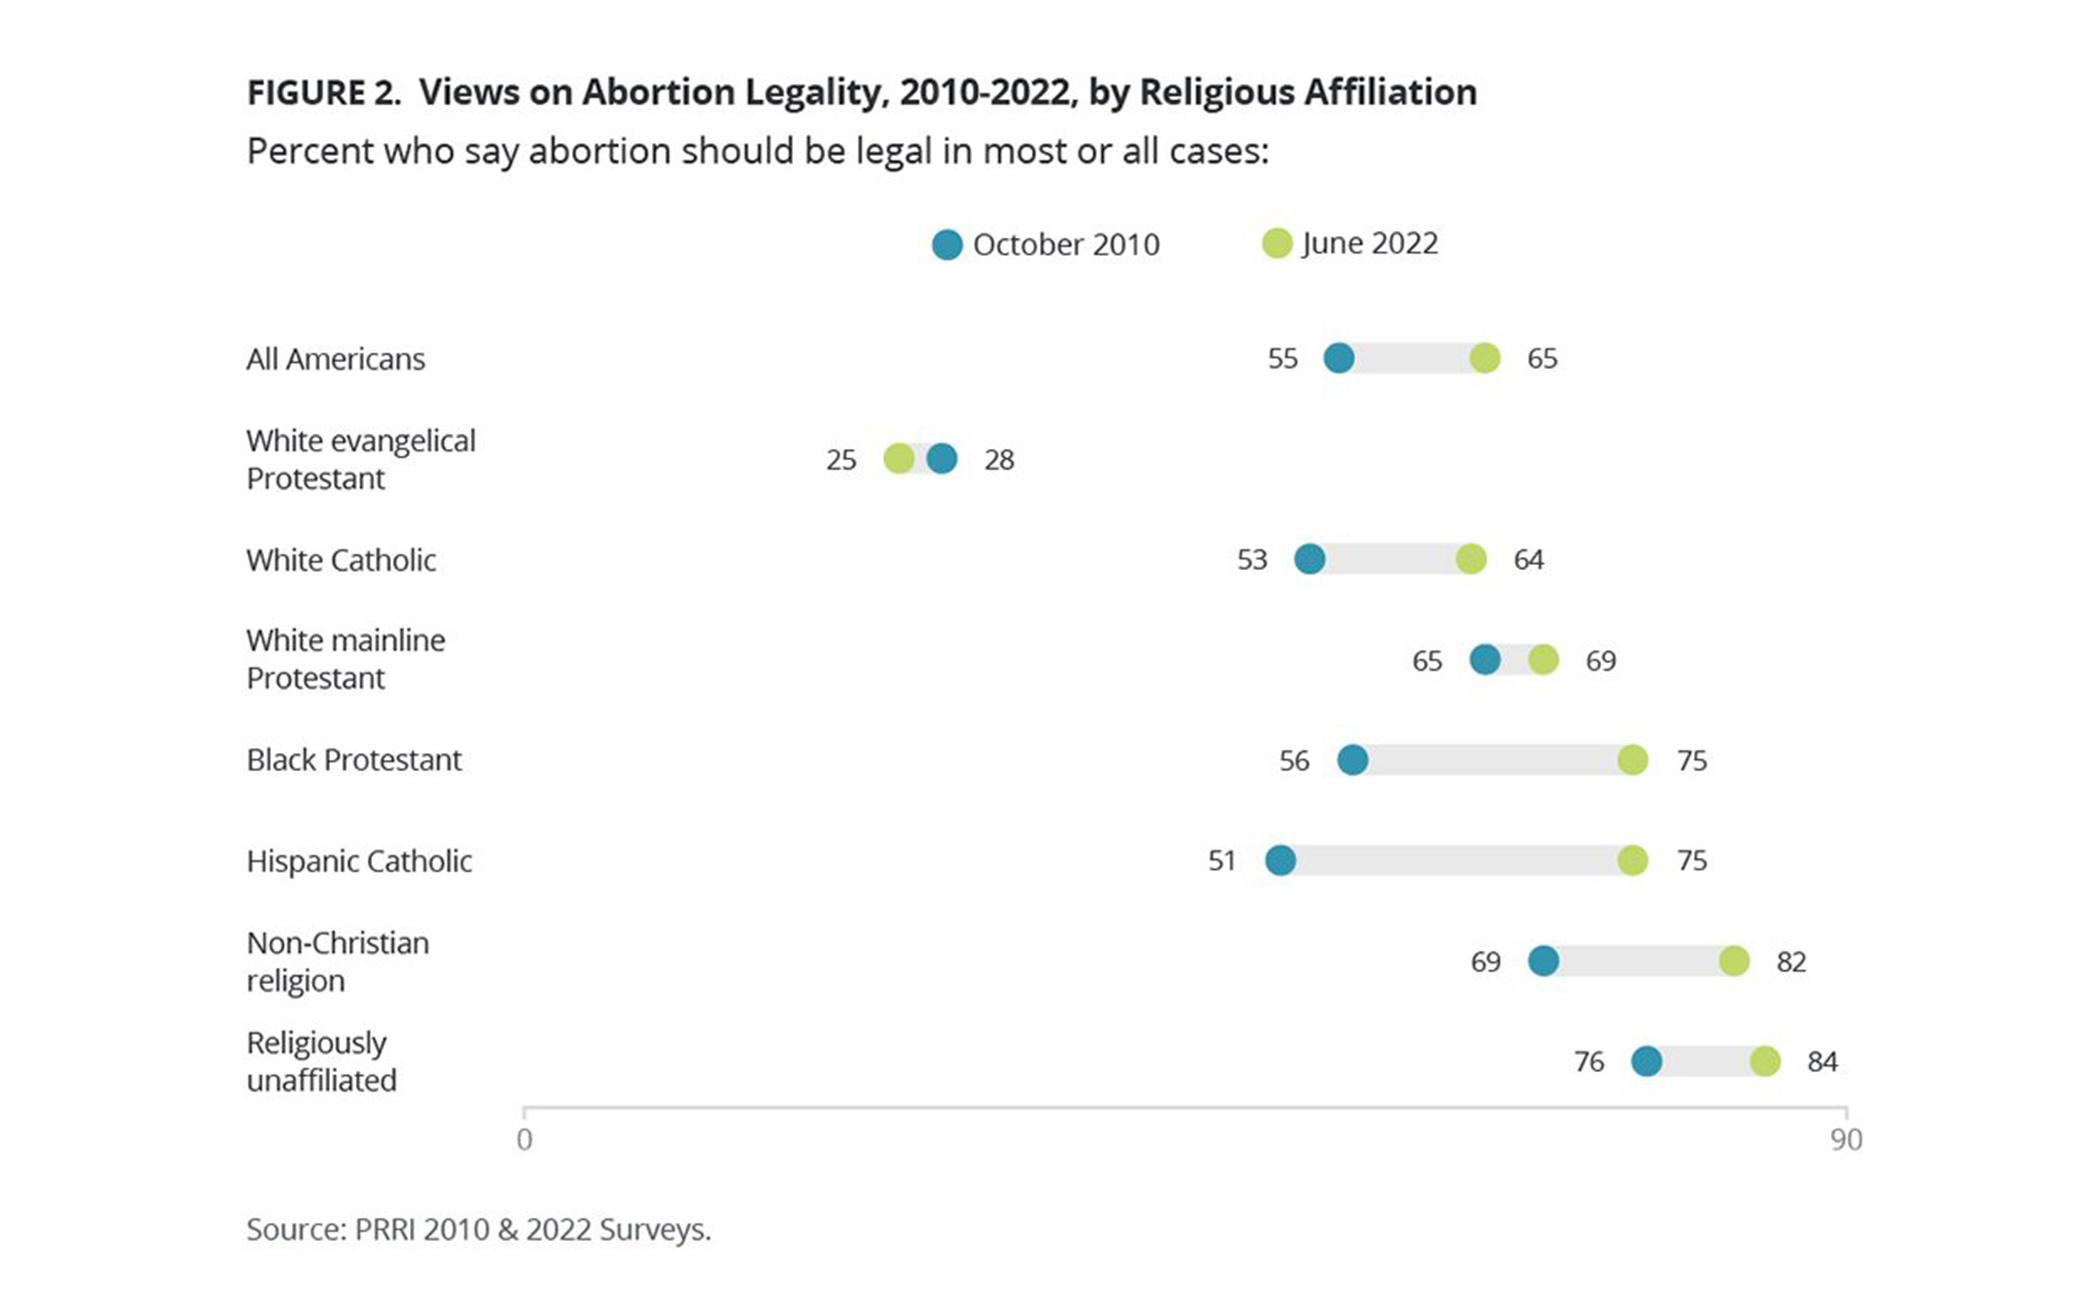 Survey: Post-Roe Views On Abortion Vary by Religious Affiliation, Race